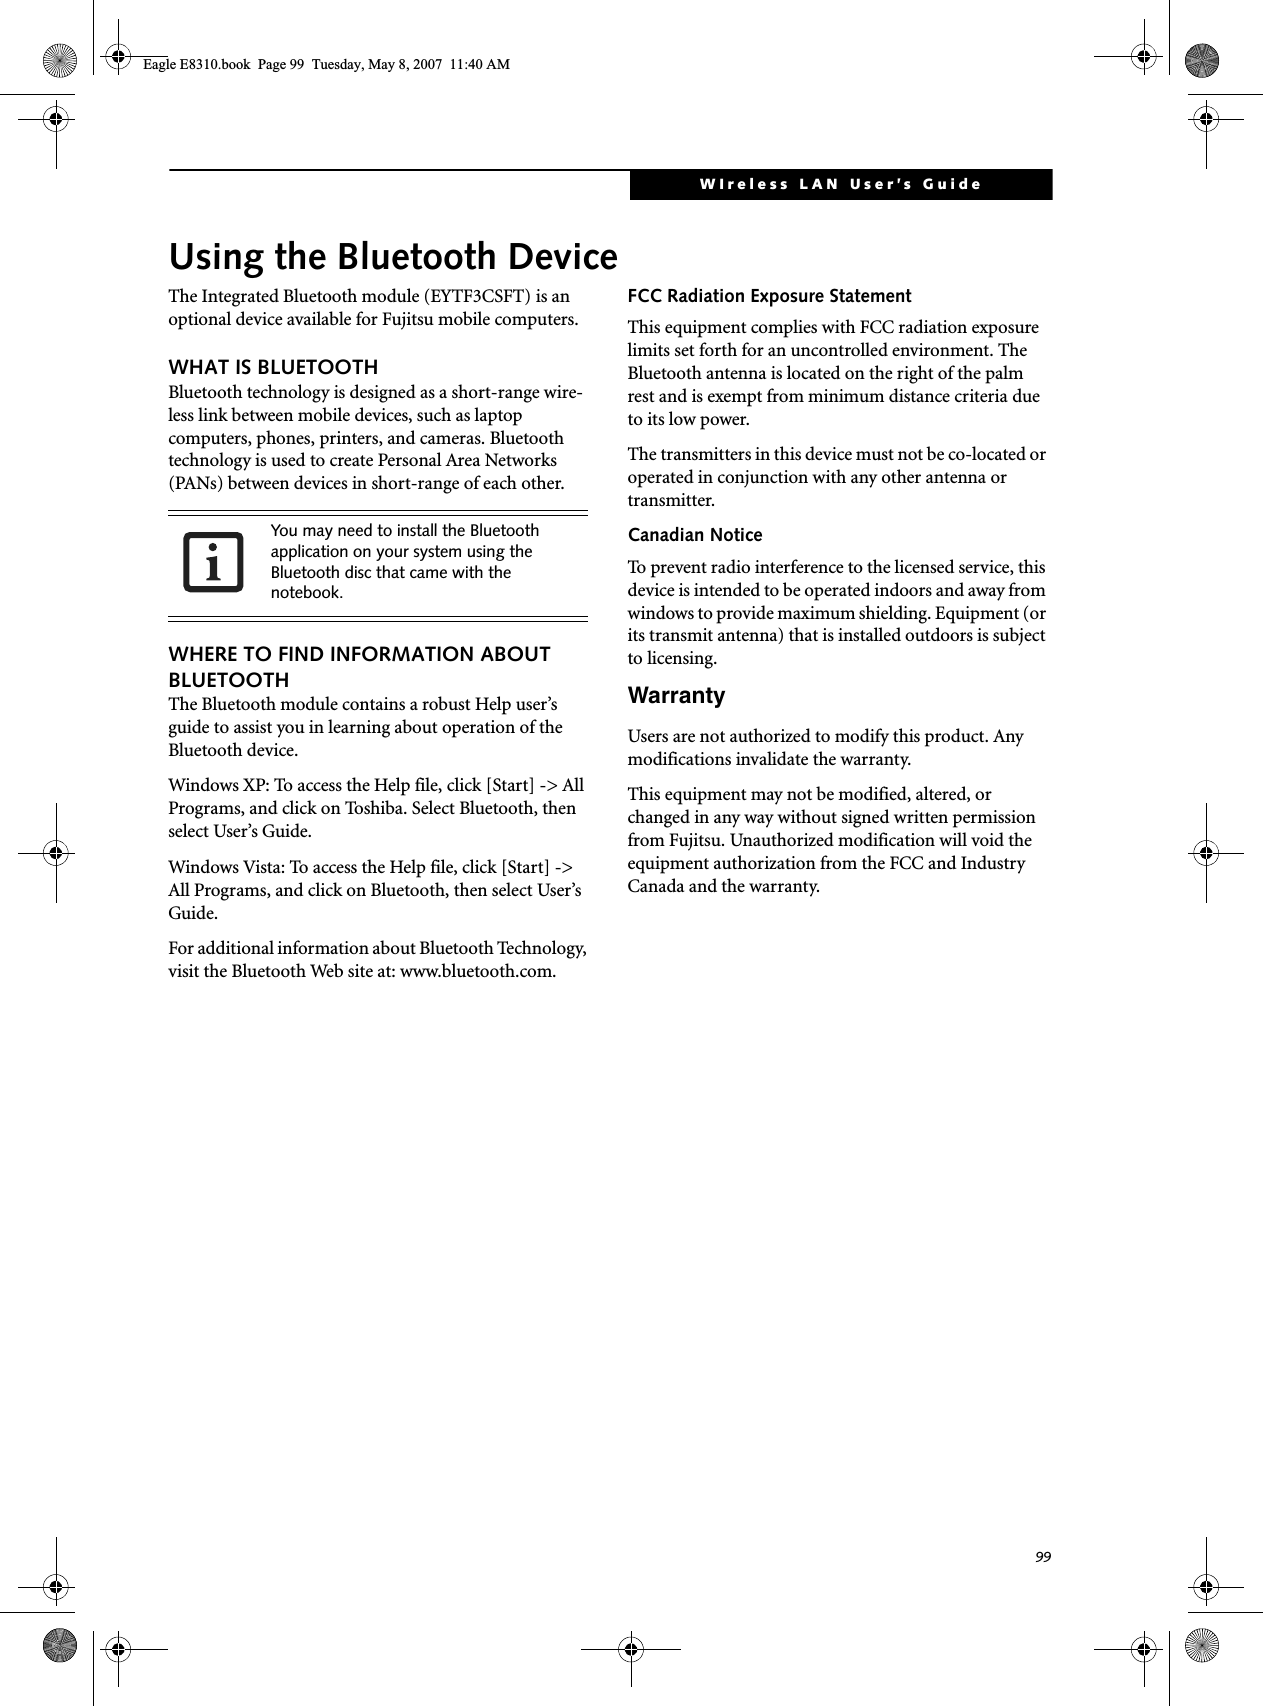 99WIreless LAN User’s Guide Using the Bluetooth DeviceThe Integrated Bluetooth module (EYTF3CSFT) is an optional device available for Fujitsu mobile computers. WHAT IS BLUETOOTHBluetooth technology is designed as a short-range wire-less link between mobile devices, such as laptop computers, phones, printers, and cameras. Bluetooth technology is used to create Personal Area Networks (PANs) between devices in short-range of each other. WHERE TO FIND INFORMATION ABOUT BLUETOOTHThe Bluetooth module contains a robust Help user’s guide to assist you in learning about operation of the Bluetooth device.Windows XP: To access the Help file, click [Start] -&gt; All Programs, and click on Toshiba. Select Bluetooth, then select User’s Guide.Windows Vista: To access the Help file, click [Start] -&gt; All Programs, and click on Bluetooth, then select User’s Guide.For additional information about Bluetooth Technology, visit the Bluetooth Web site at: www.bluetooth.com.FCC Radiation Exposure StatementThis equipment complies with FCC radiation exposure limits set forth for an uncontrolled environment. The Bluetooth antenna is located on the right of the palm rest and is exempt from minimum distance criteria due to its low power. The transmitters in this device must not be co-located or operated in conjunction with any other antenna or transmitter.Canadian NoticeTo prevent radio interference to the licensed service, this device is intended to be operated indoors and away from windows to provide maximum shielding. Equipment (or its transmit antenna) that is installed outdoors is subject to licensing.WarrantyUsers are not authorized to modify this product. Any modifications invalidate the warranty.This equipment may not be modified, altered, or changed in any way without signed written permission from Fujitsu. Unauthorized modification will void the equipment authorization from the FCC and Industry Canada and the warranty.You may need to install the Bluetooth application on your system using the Bluetooth disc that came with the notebook.Eagle E8310.book  Page 99  Tuesday, May 8, 2007  11:40 AM